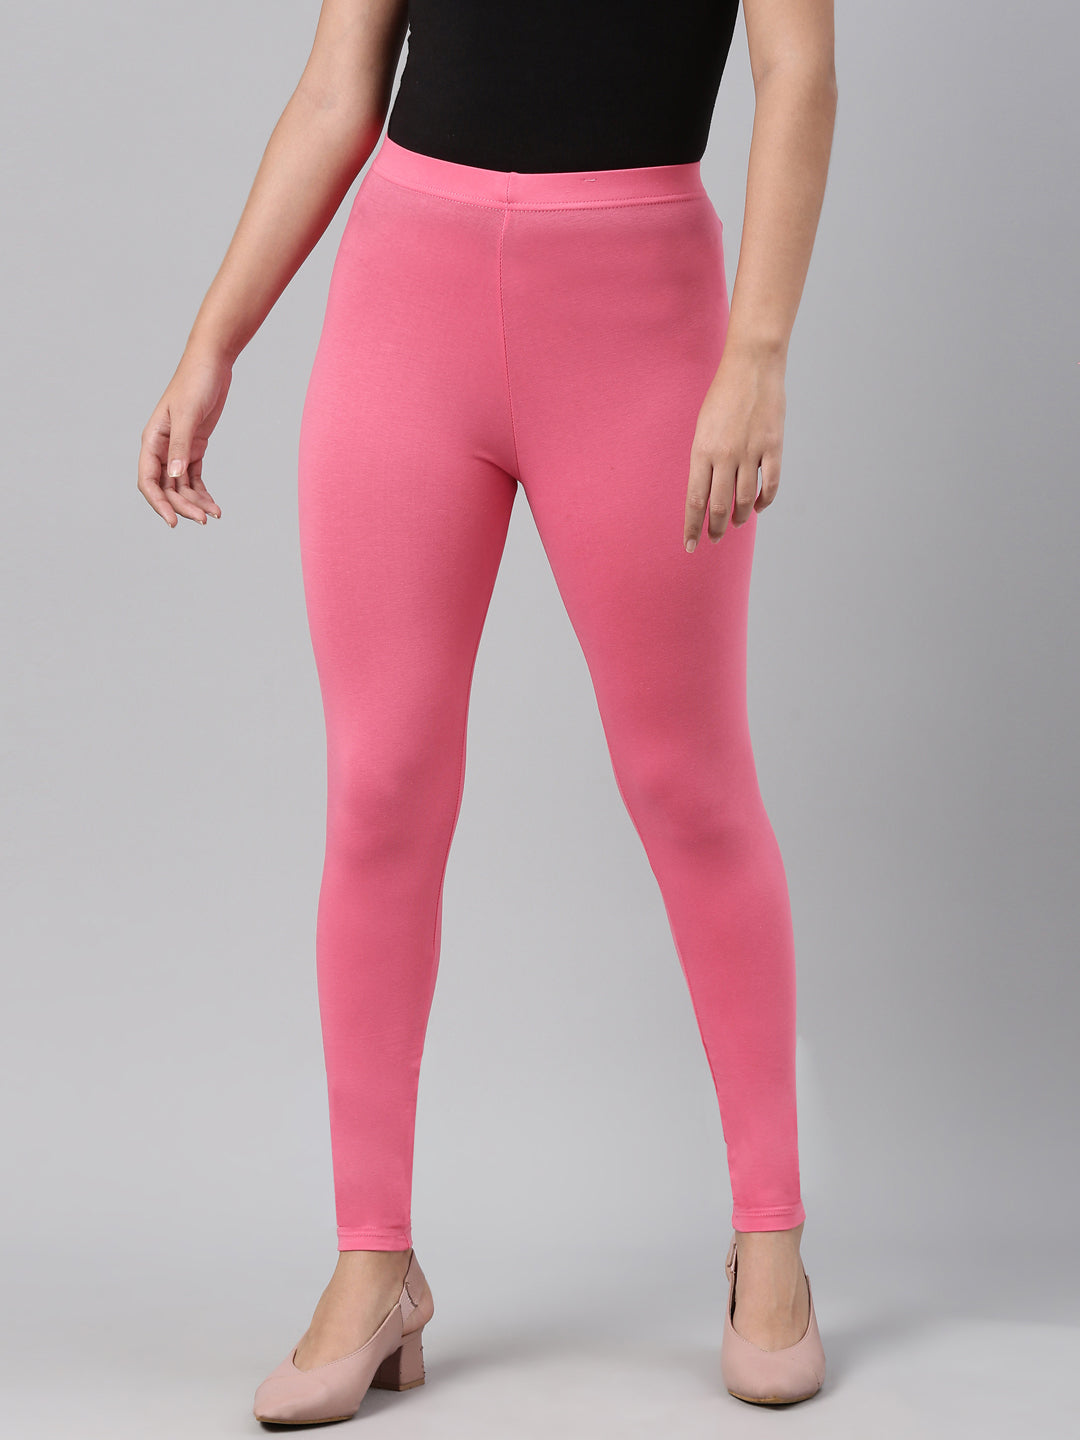 Women Solid Young Pink Ankle Length Leggings – Cherrypick